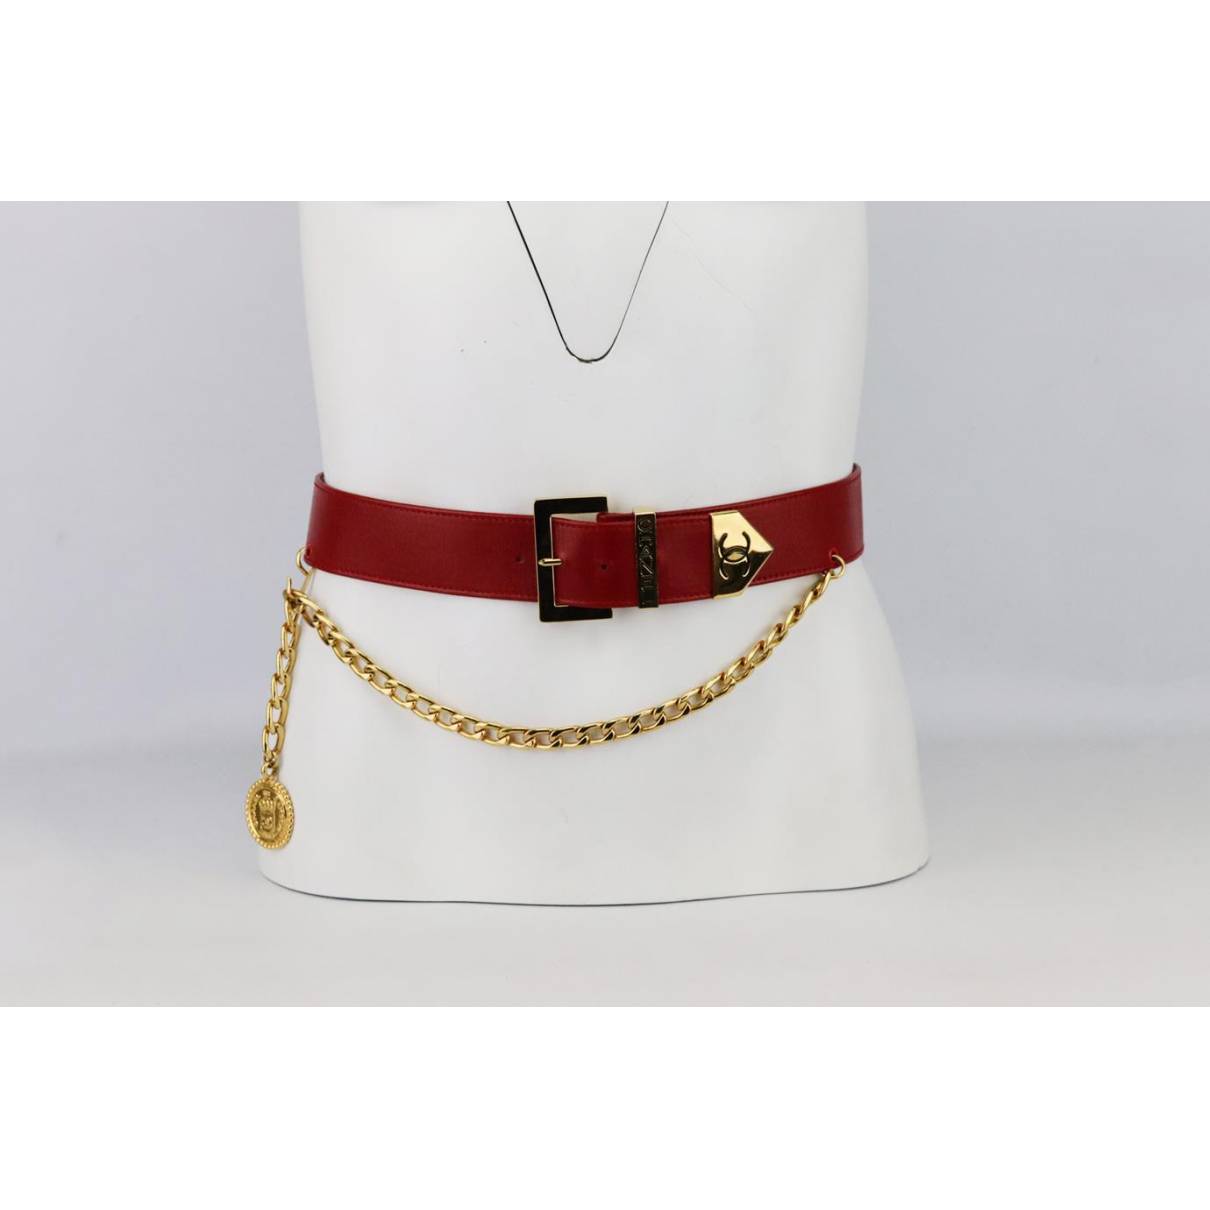 Chanel - Authenticated Belt - Leather Red for Women, Good Condition